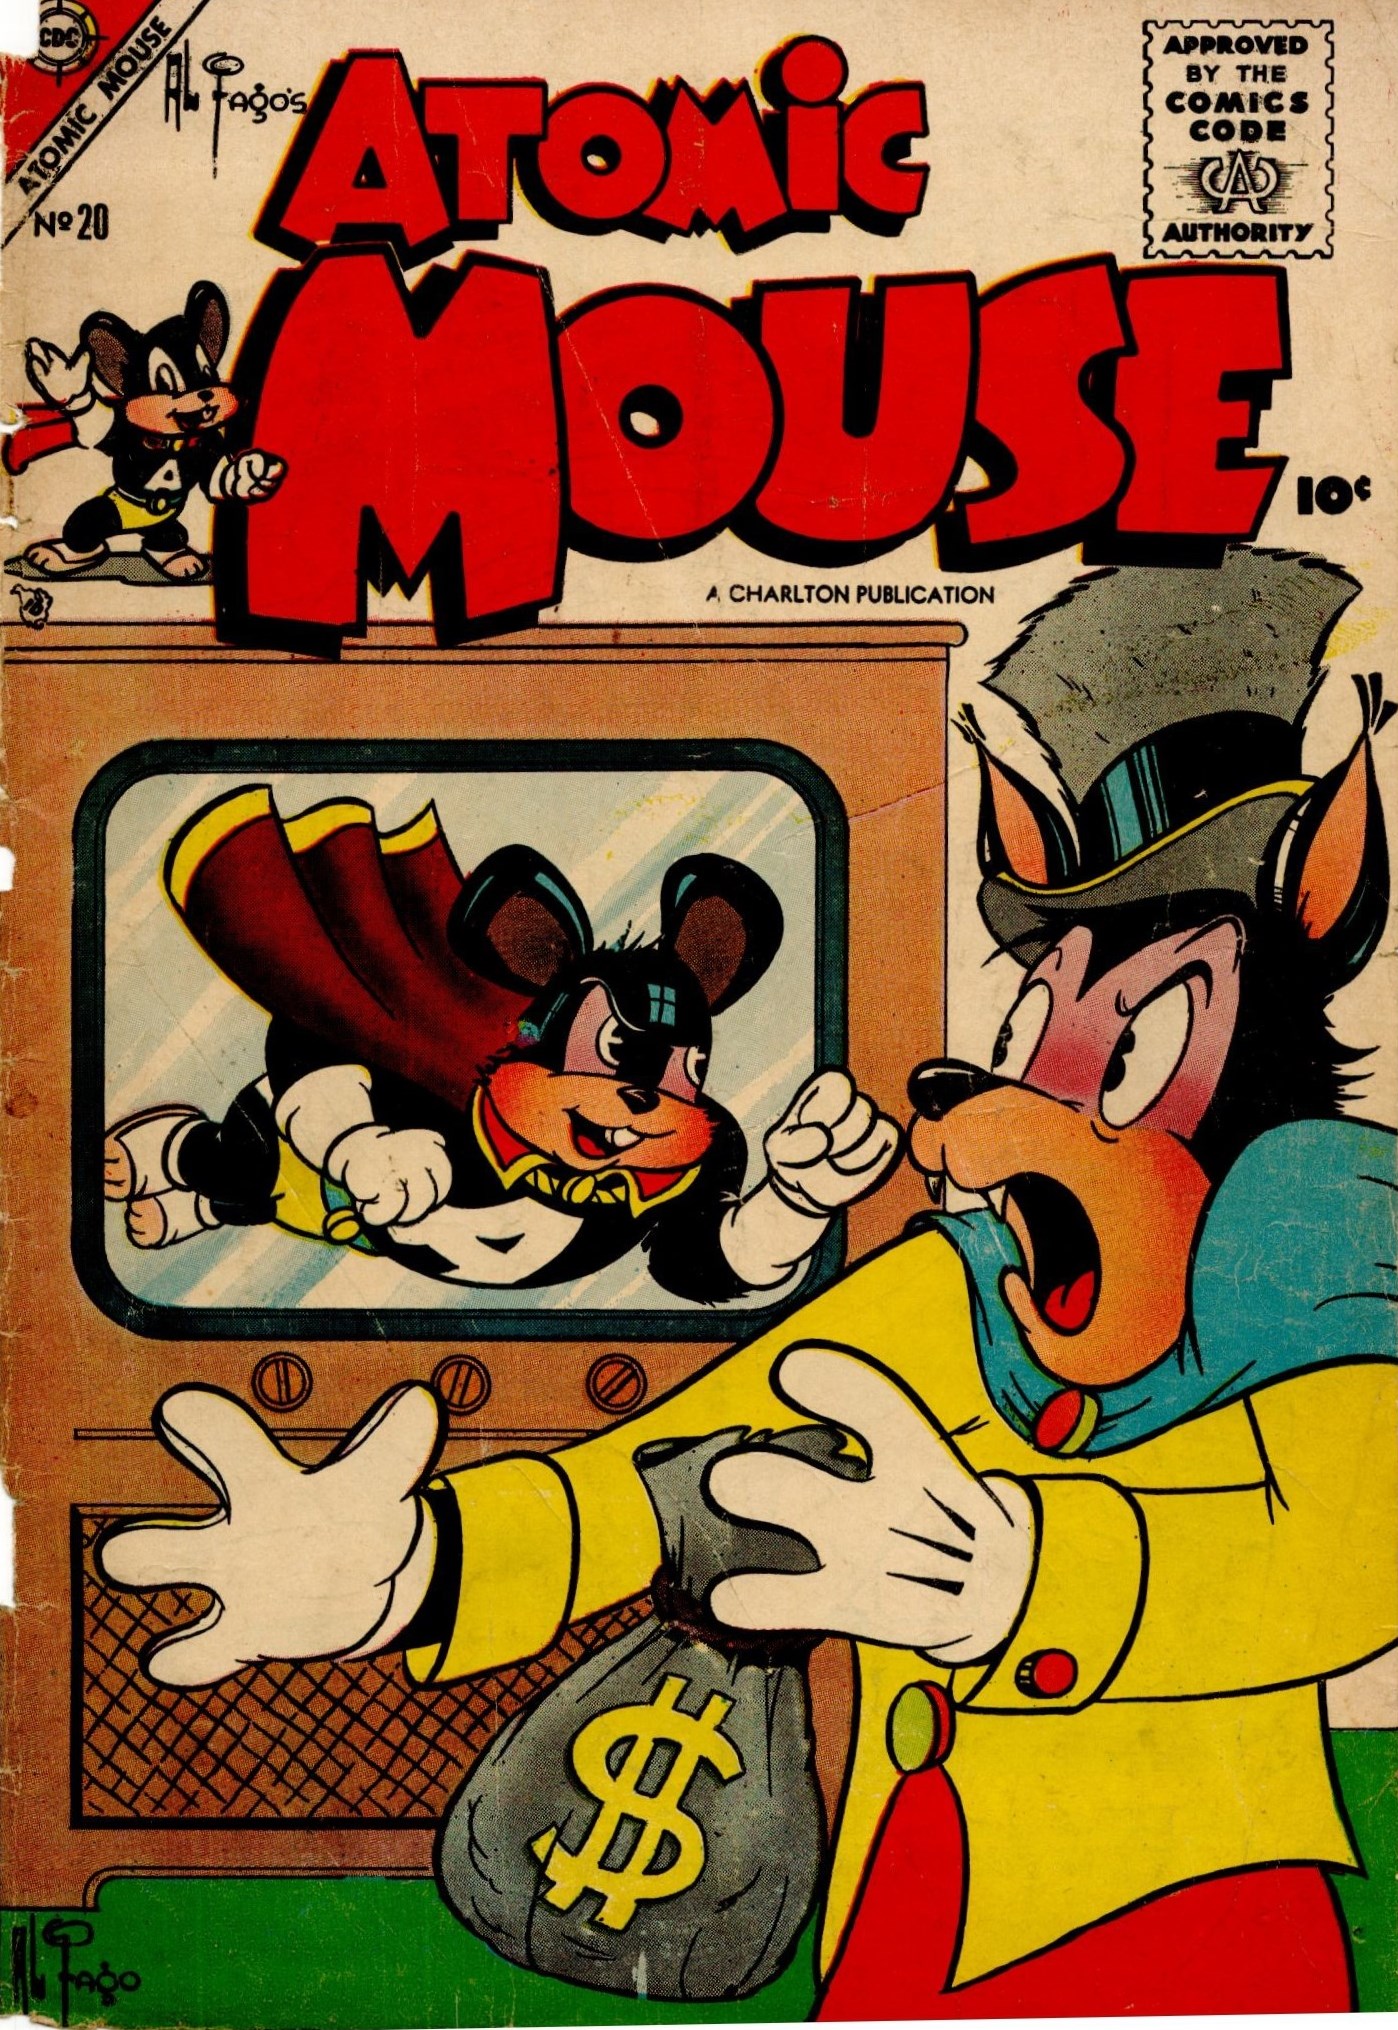 Read online Atomic Mouse comic -  Issue #20 - 1